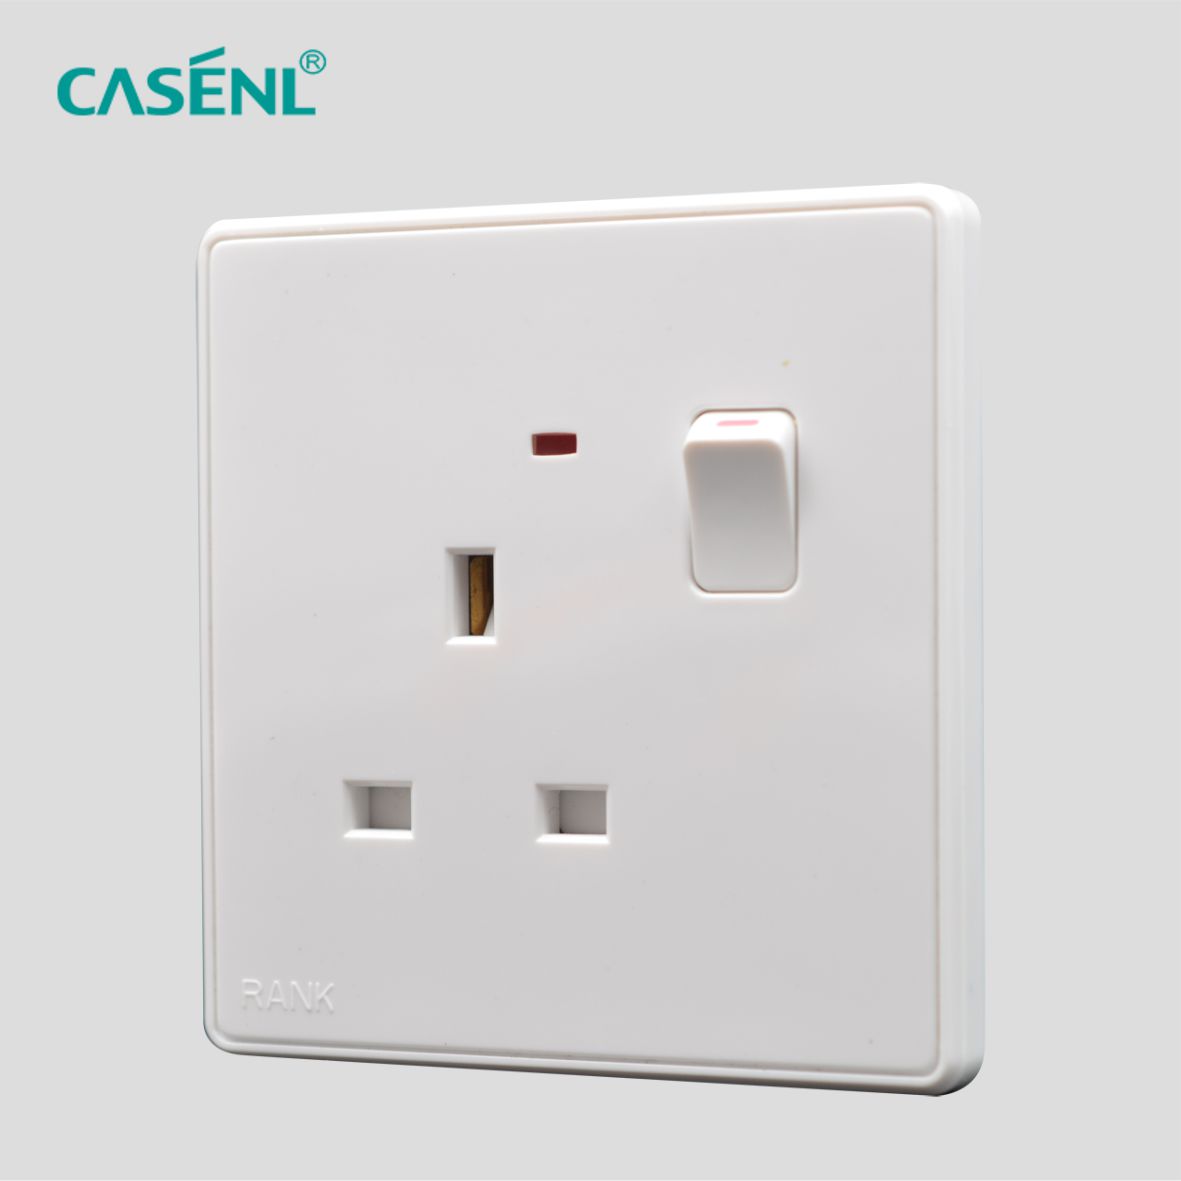 BS Switch Socket with Light 13A 